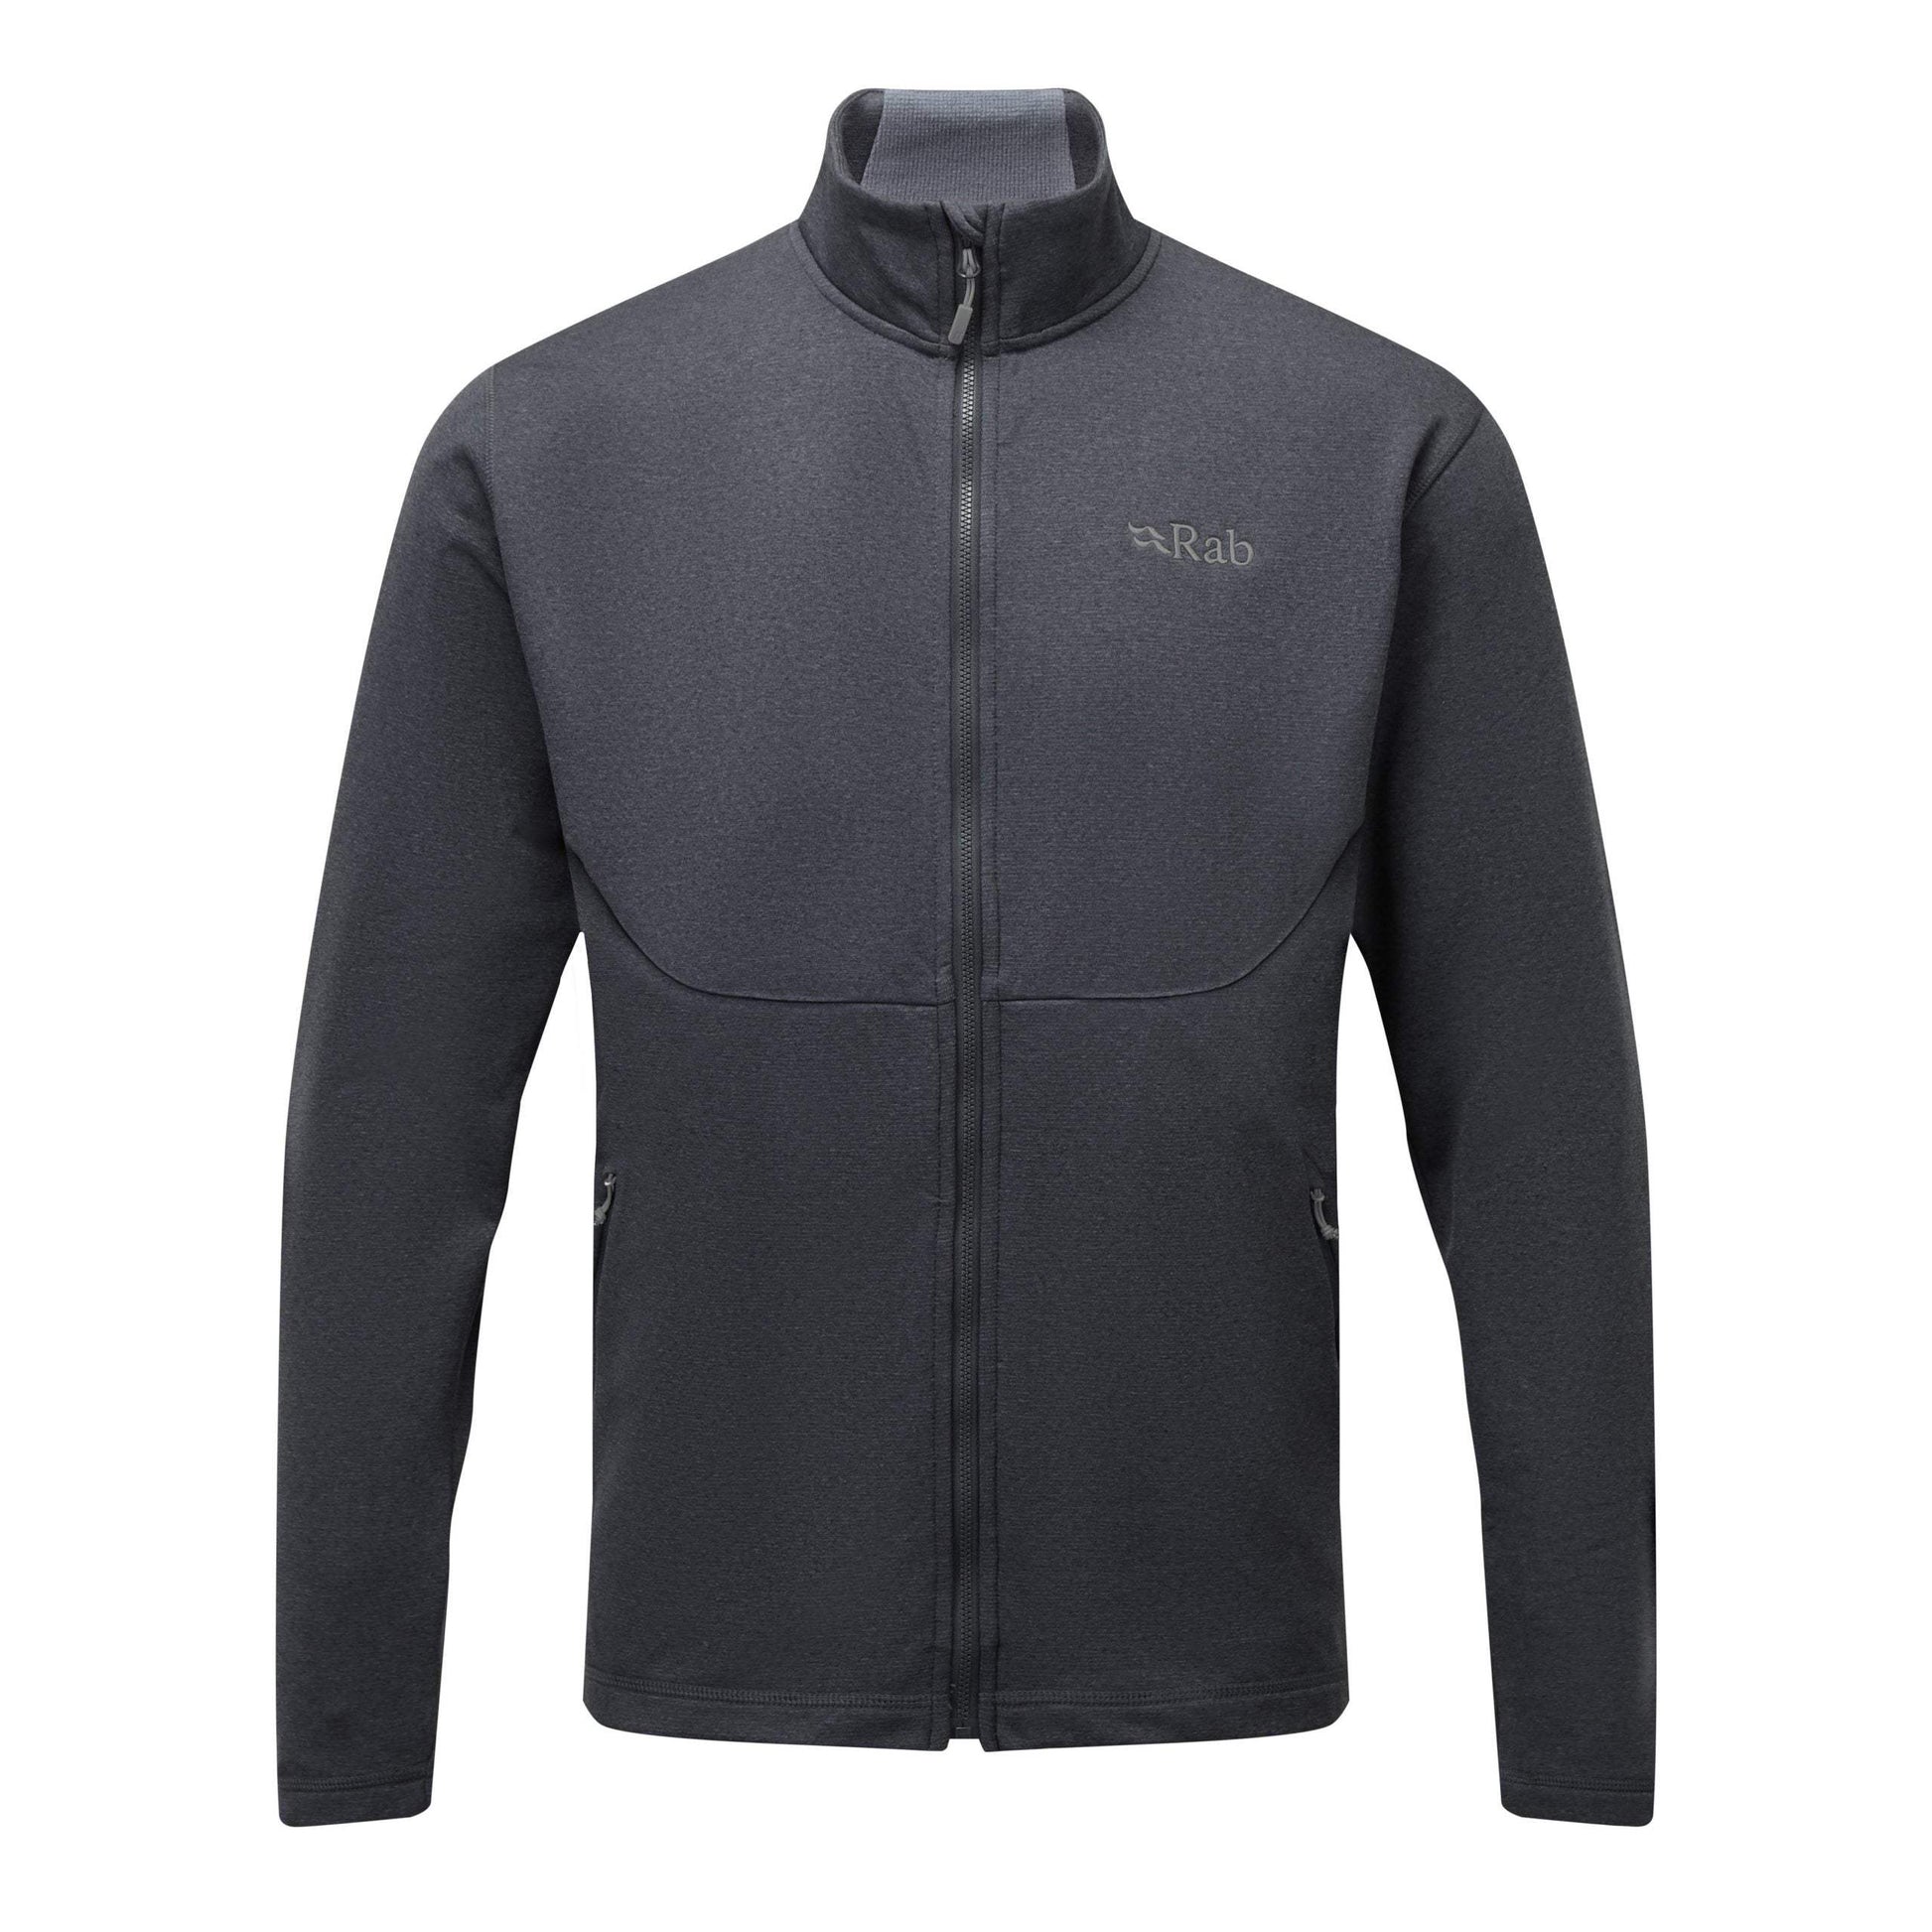 Men’s Geon Jacket by RAB - The Luxury Promotional Gifts Company Limited